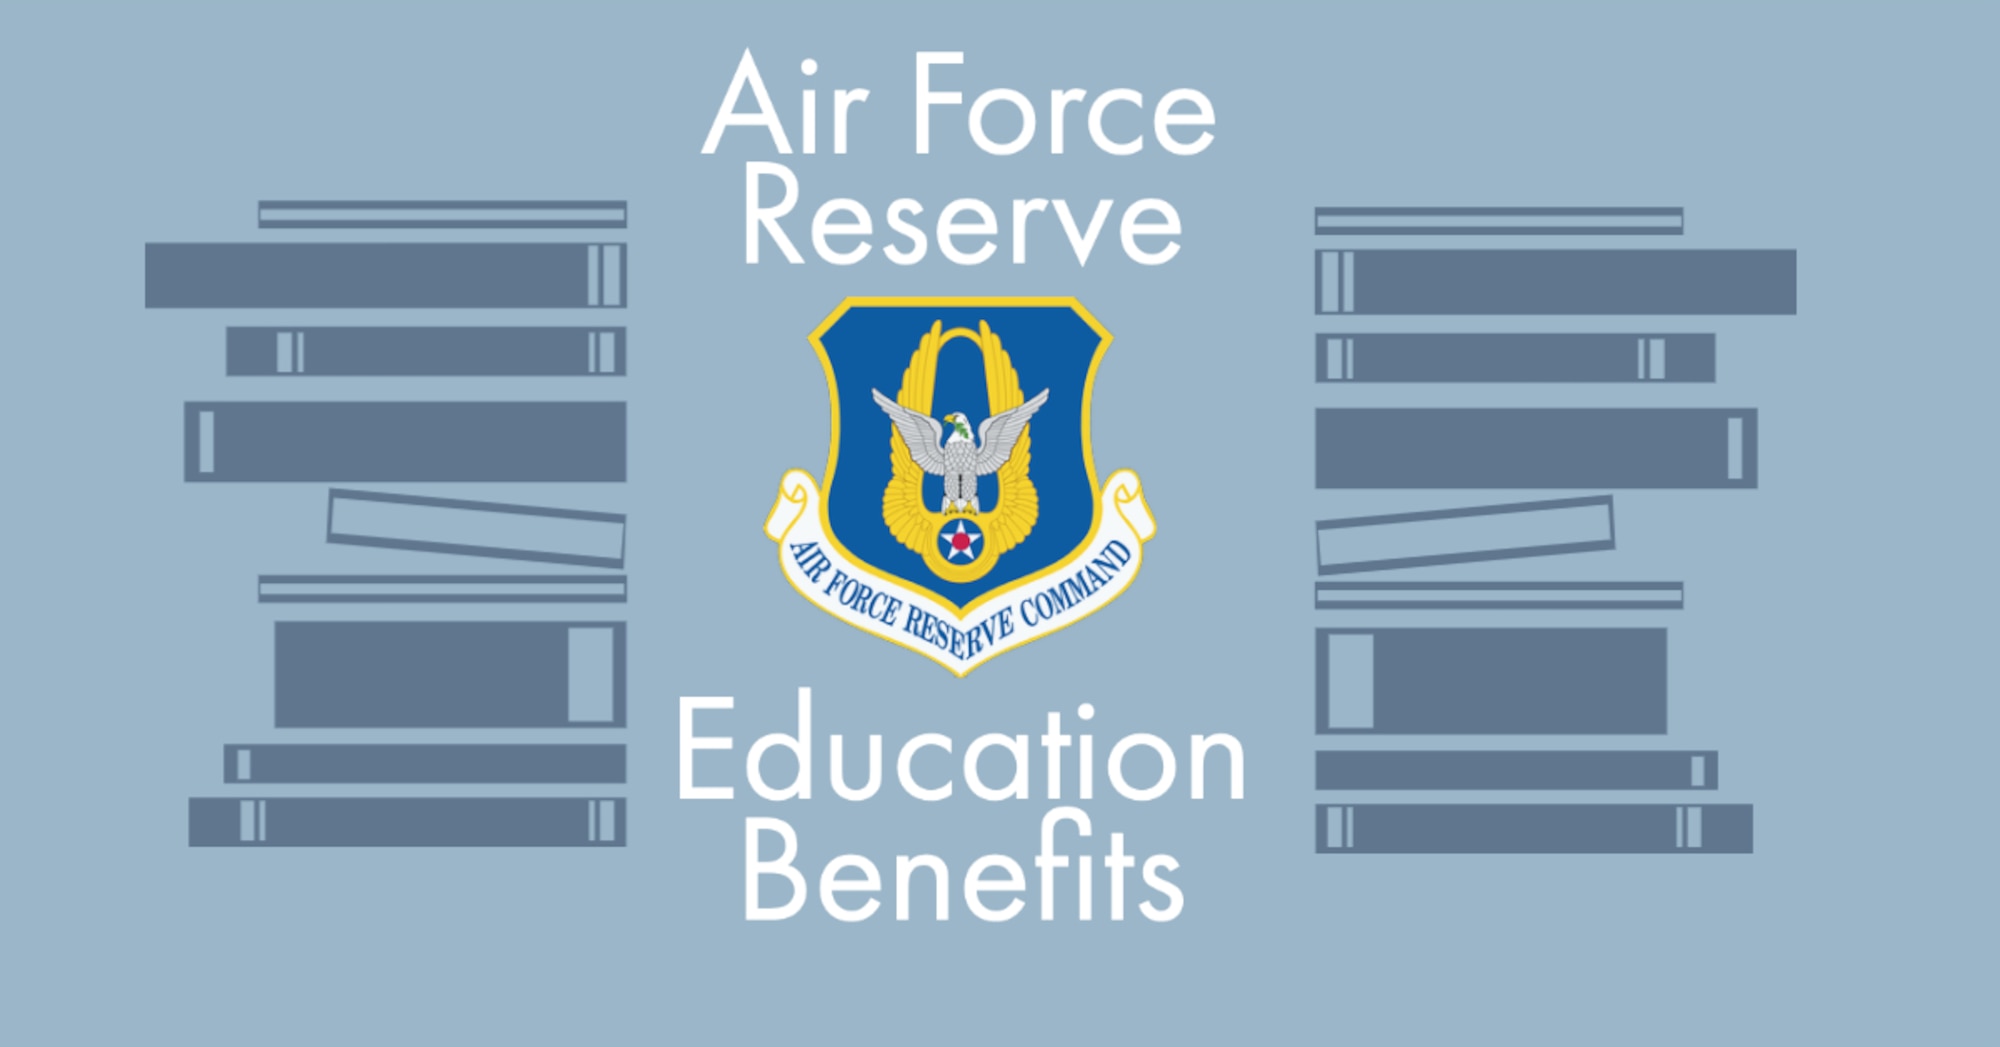 The Air Force Reserve provides opportunities for Airmen looking for a way to pay for higher learning. (U.S. Air Force graphic by Staff Sgt. Kristen Pittman)